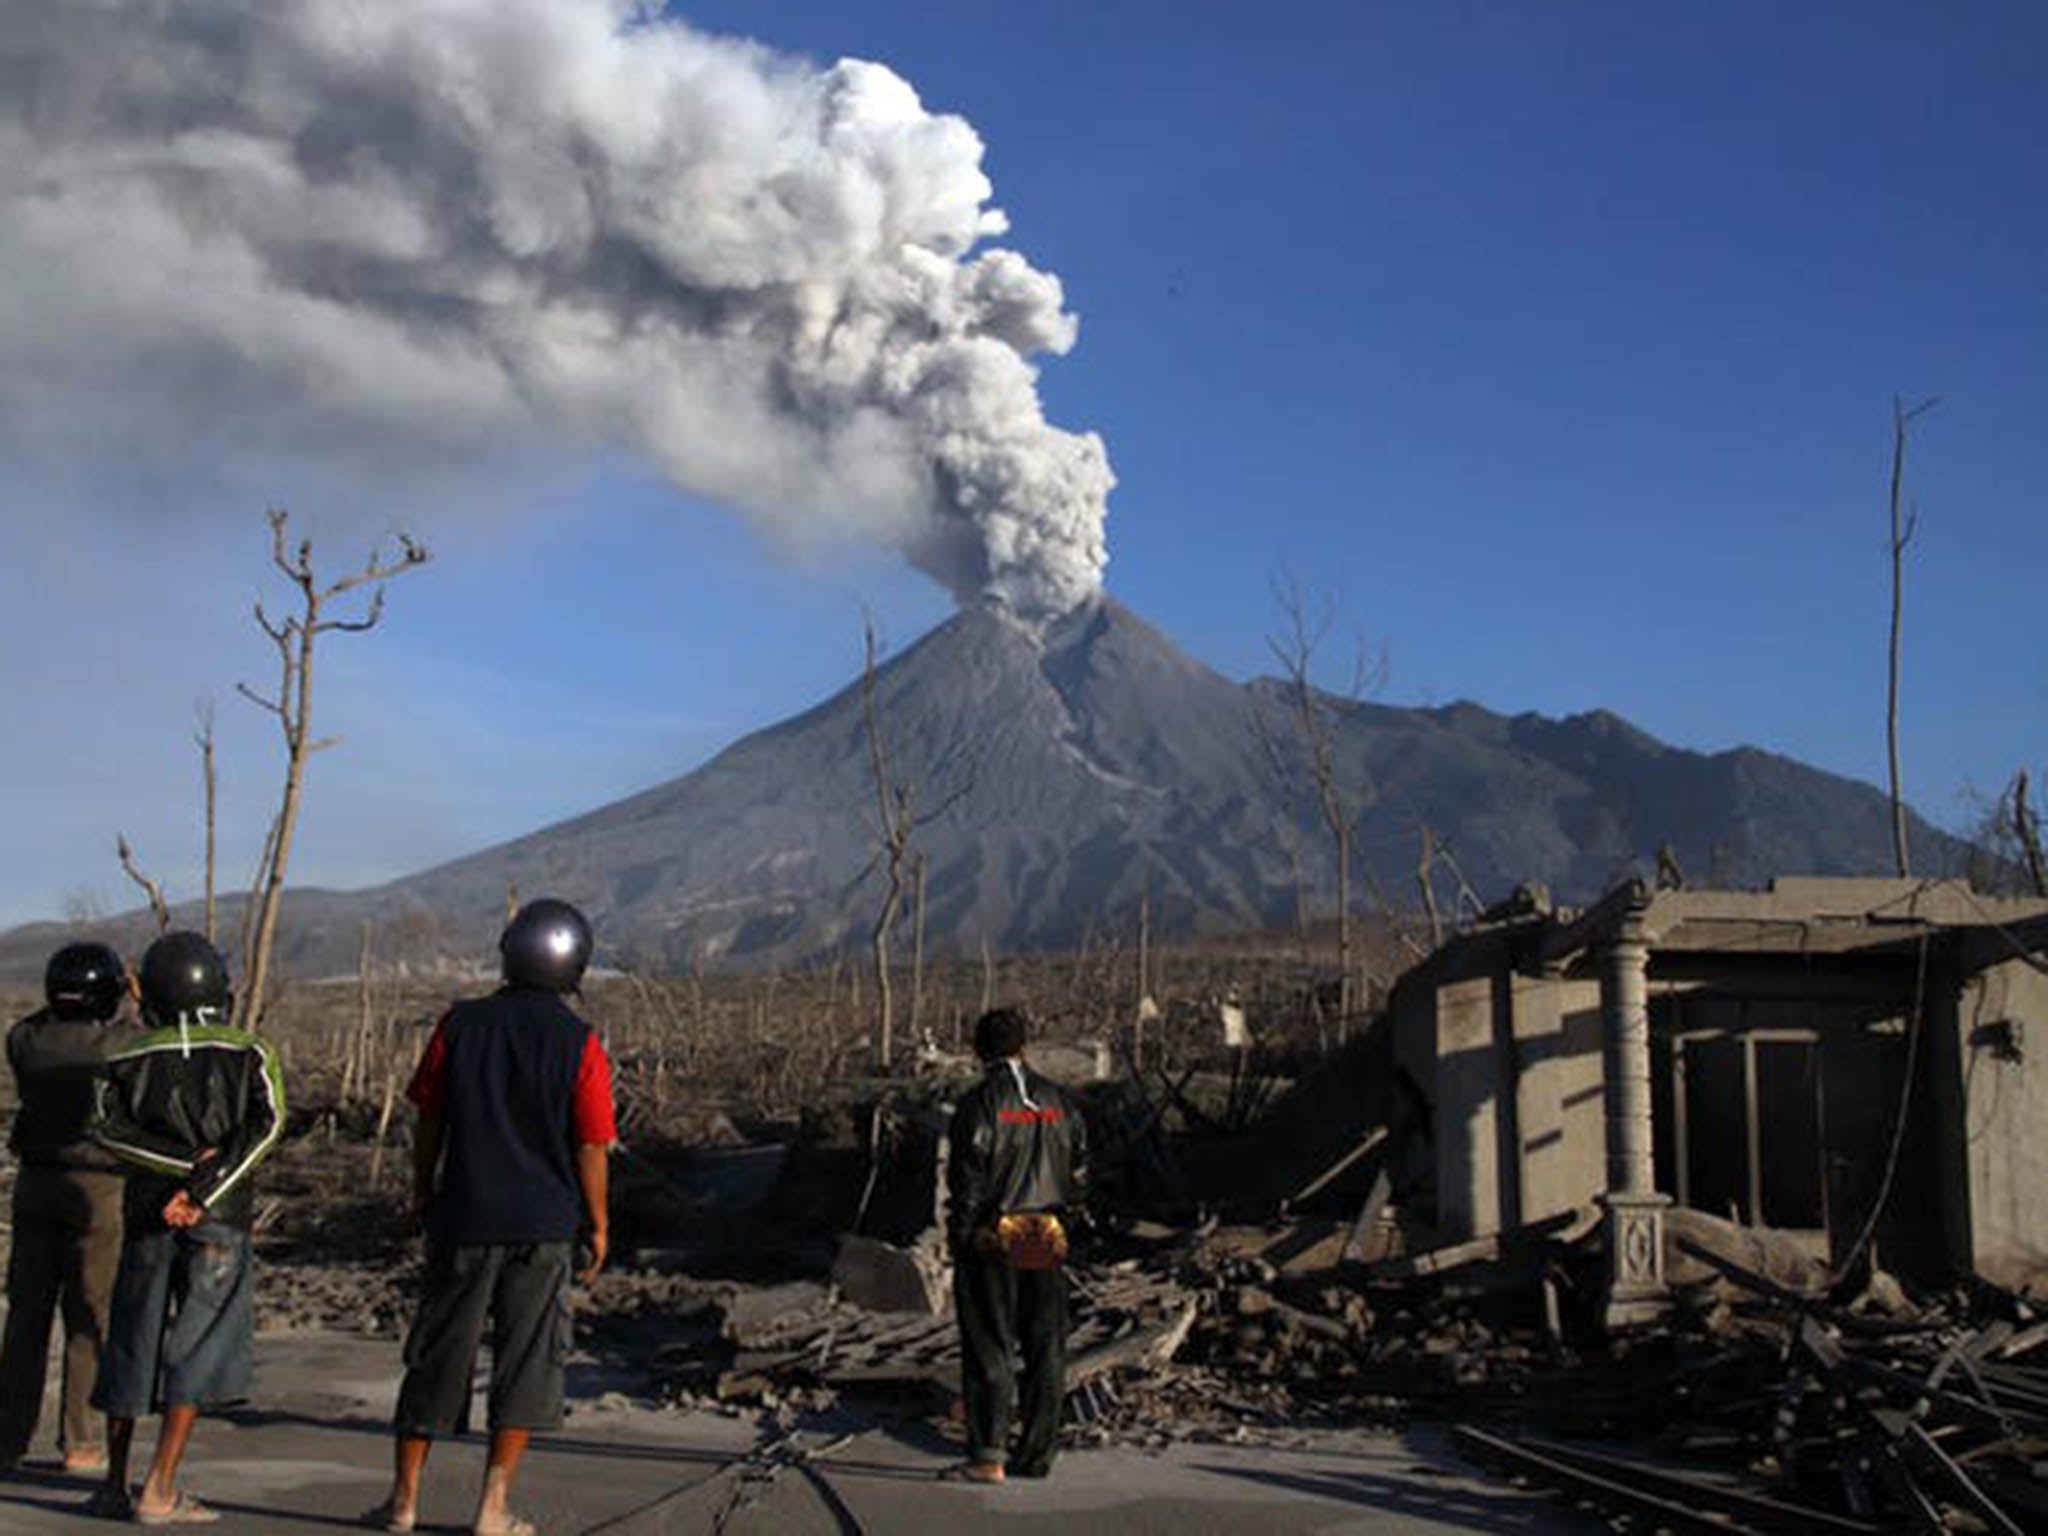 The eruption of Mount Merapi in 2010 was one of the deadliest of the 21st century